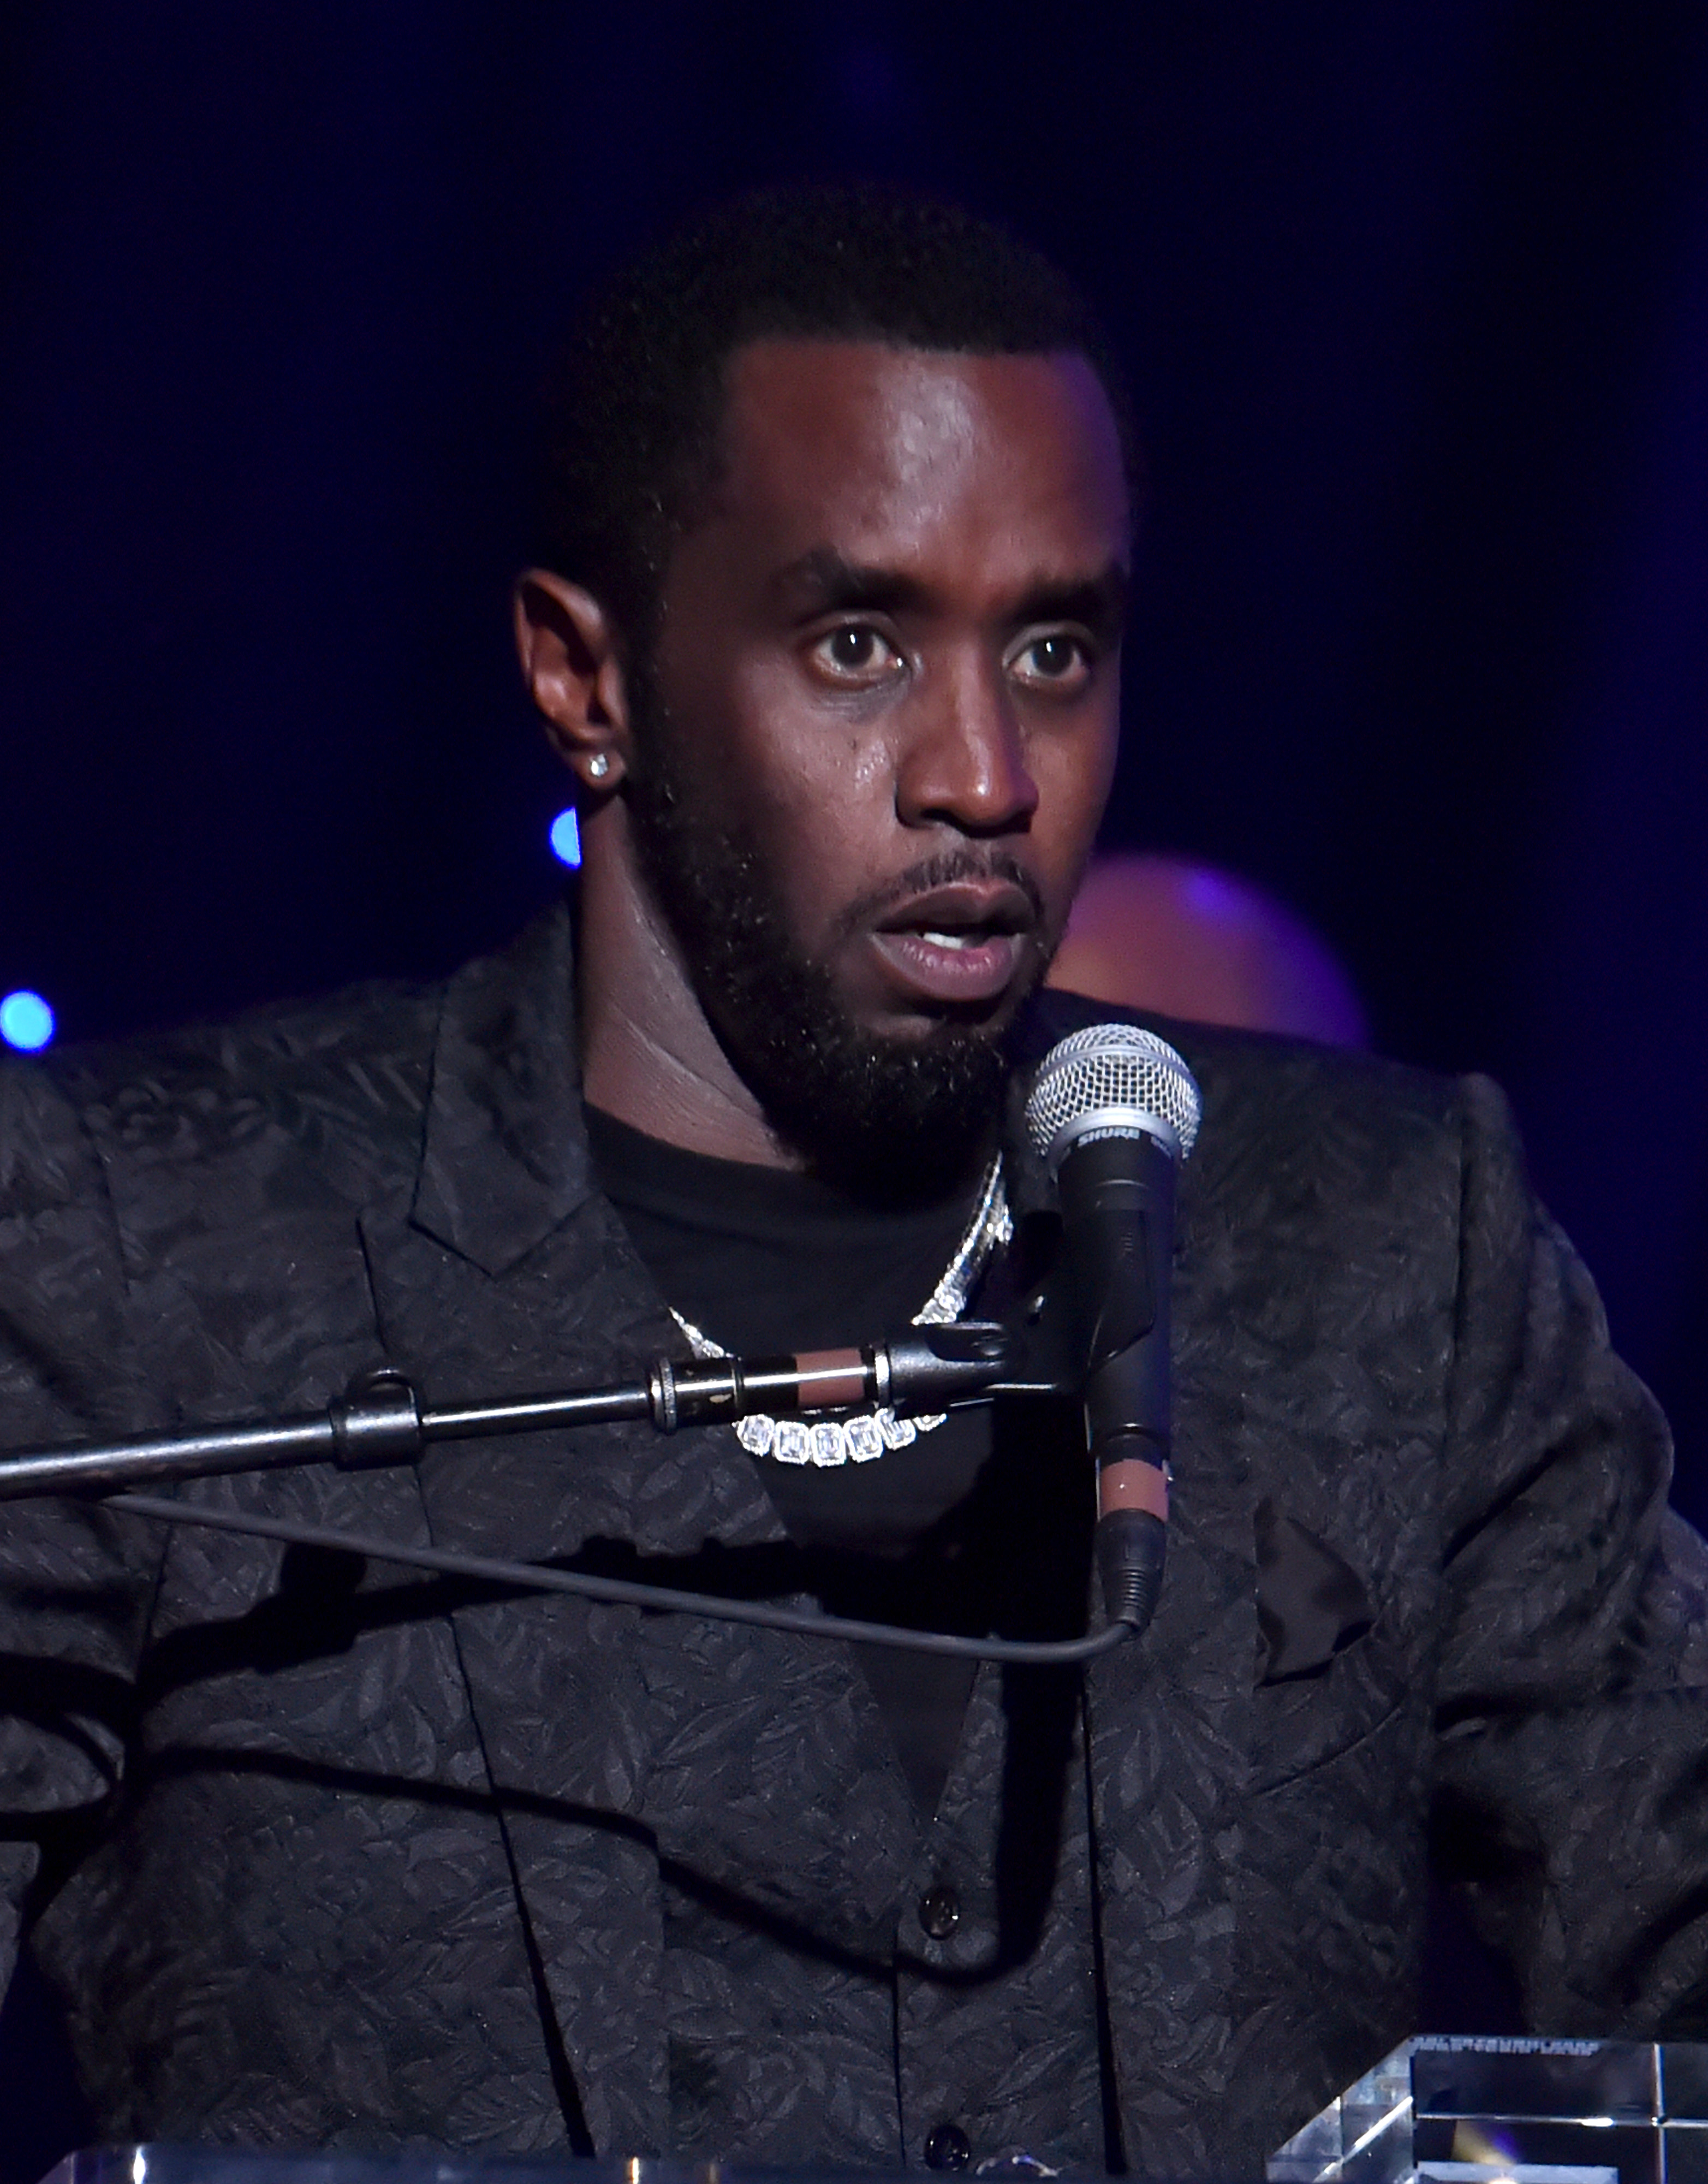 Sean &quot;Diddy&quot; Combs, dressed in a textured suit and chain necklace, speaking into a microphone at an event